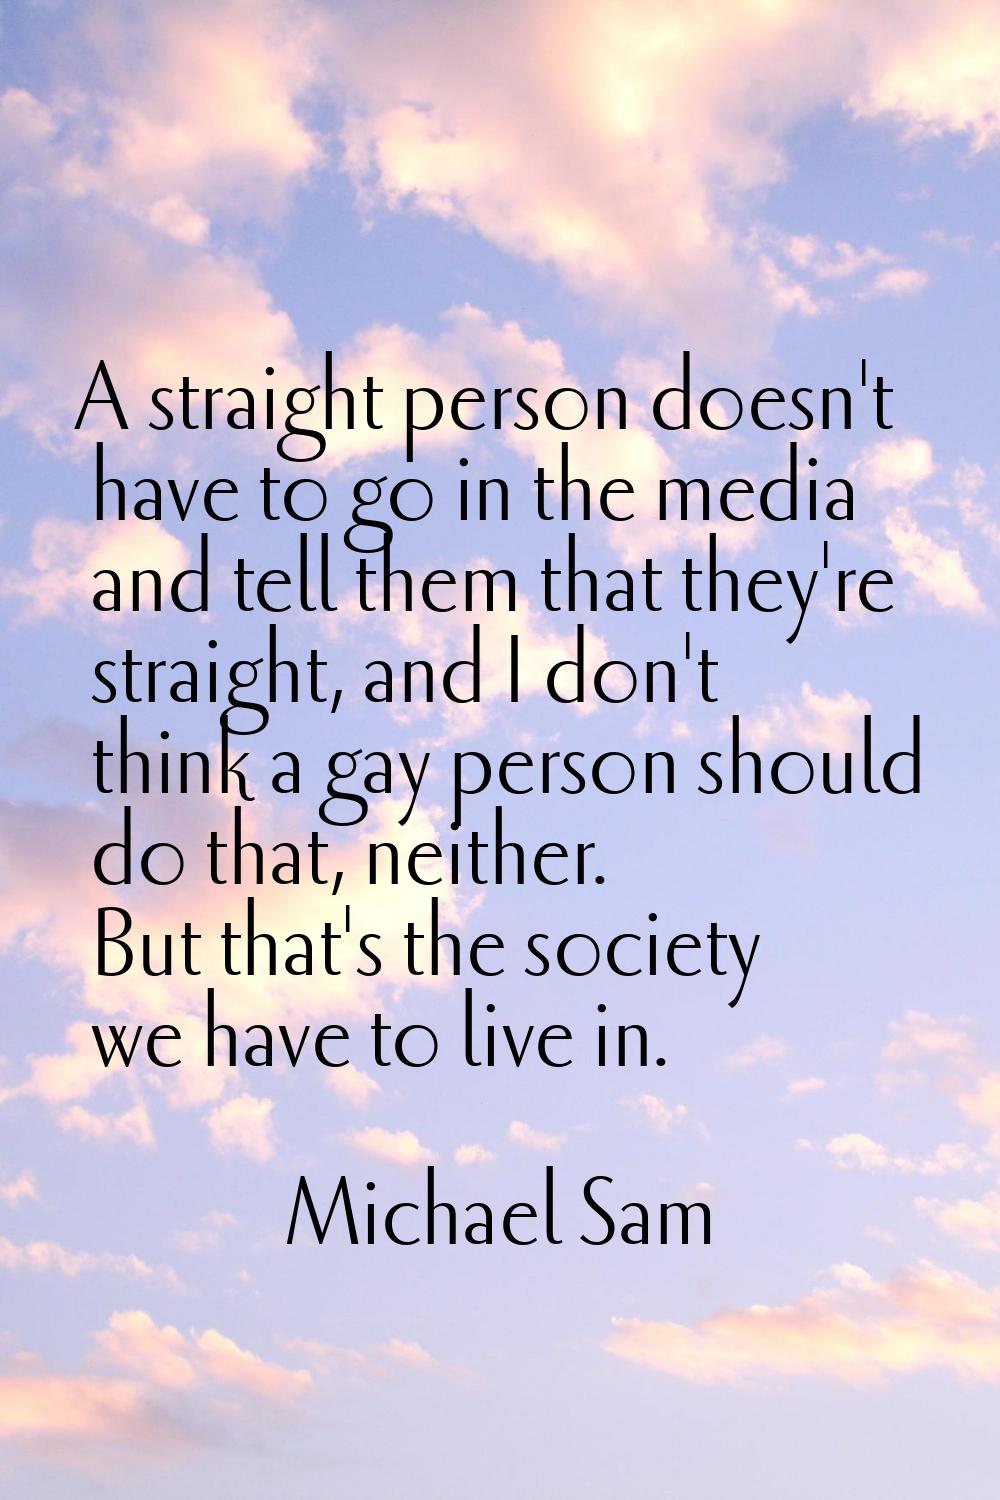 A straight person doesn't have to go in the media and tell them that they're straight, and I don't 